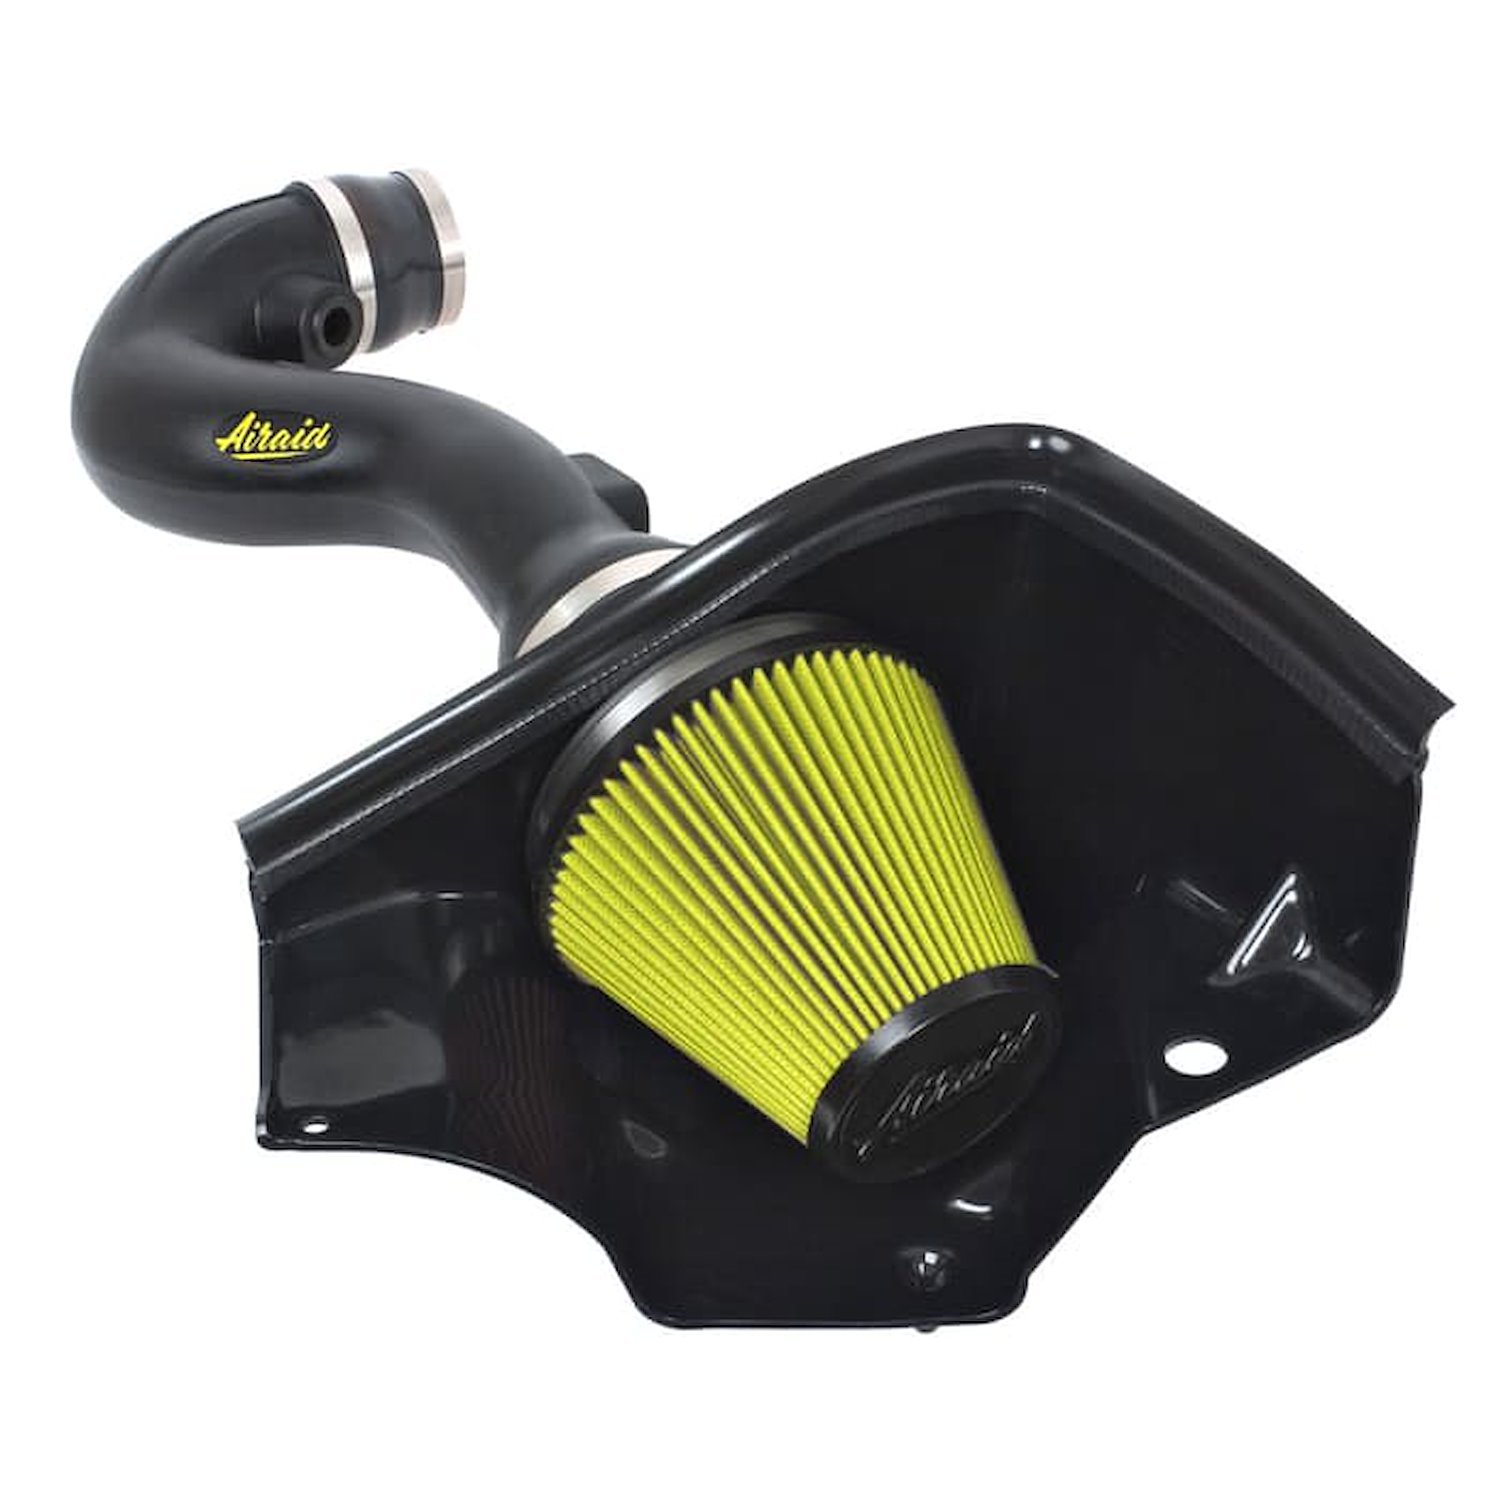 MXP Cold Air Intake System 2005-2009 Ford Mustang 4.0L V6 - SynthaFlow 'Oil' Filter